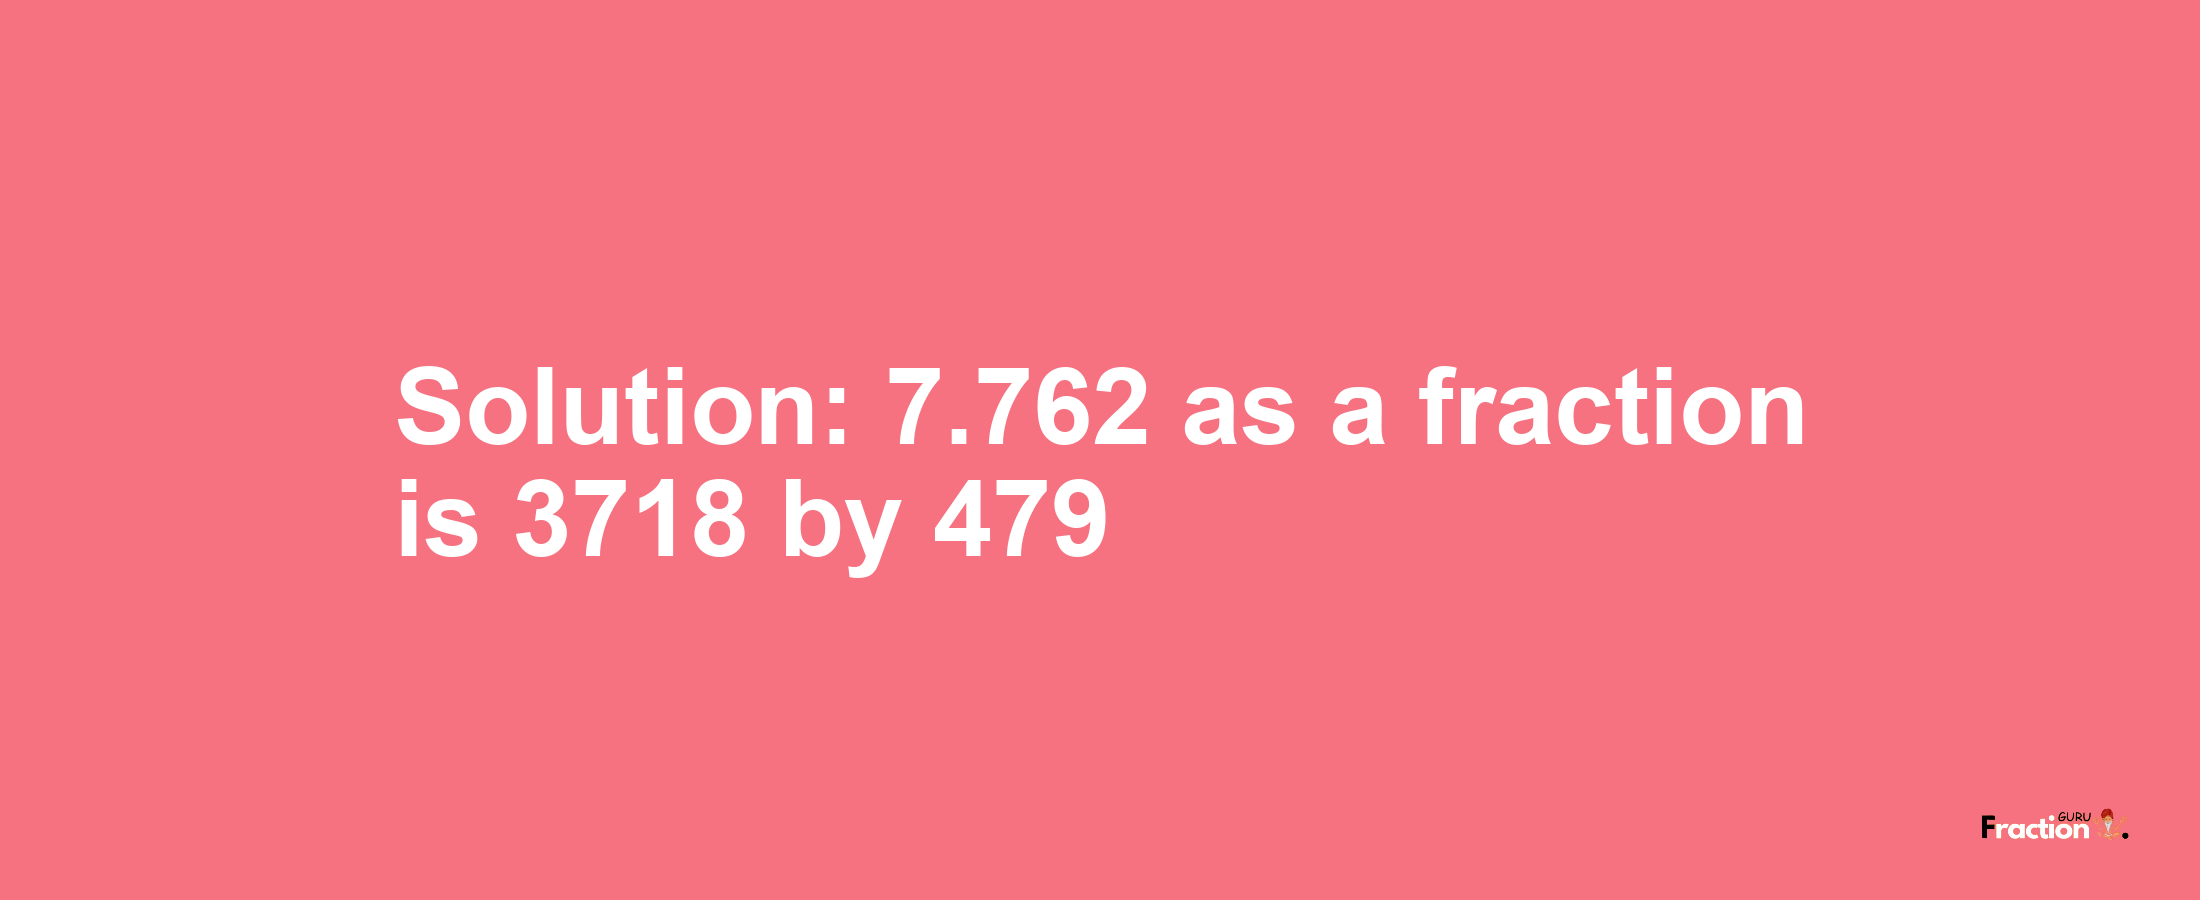 Solution:7.762 as a fraction is 3718/479